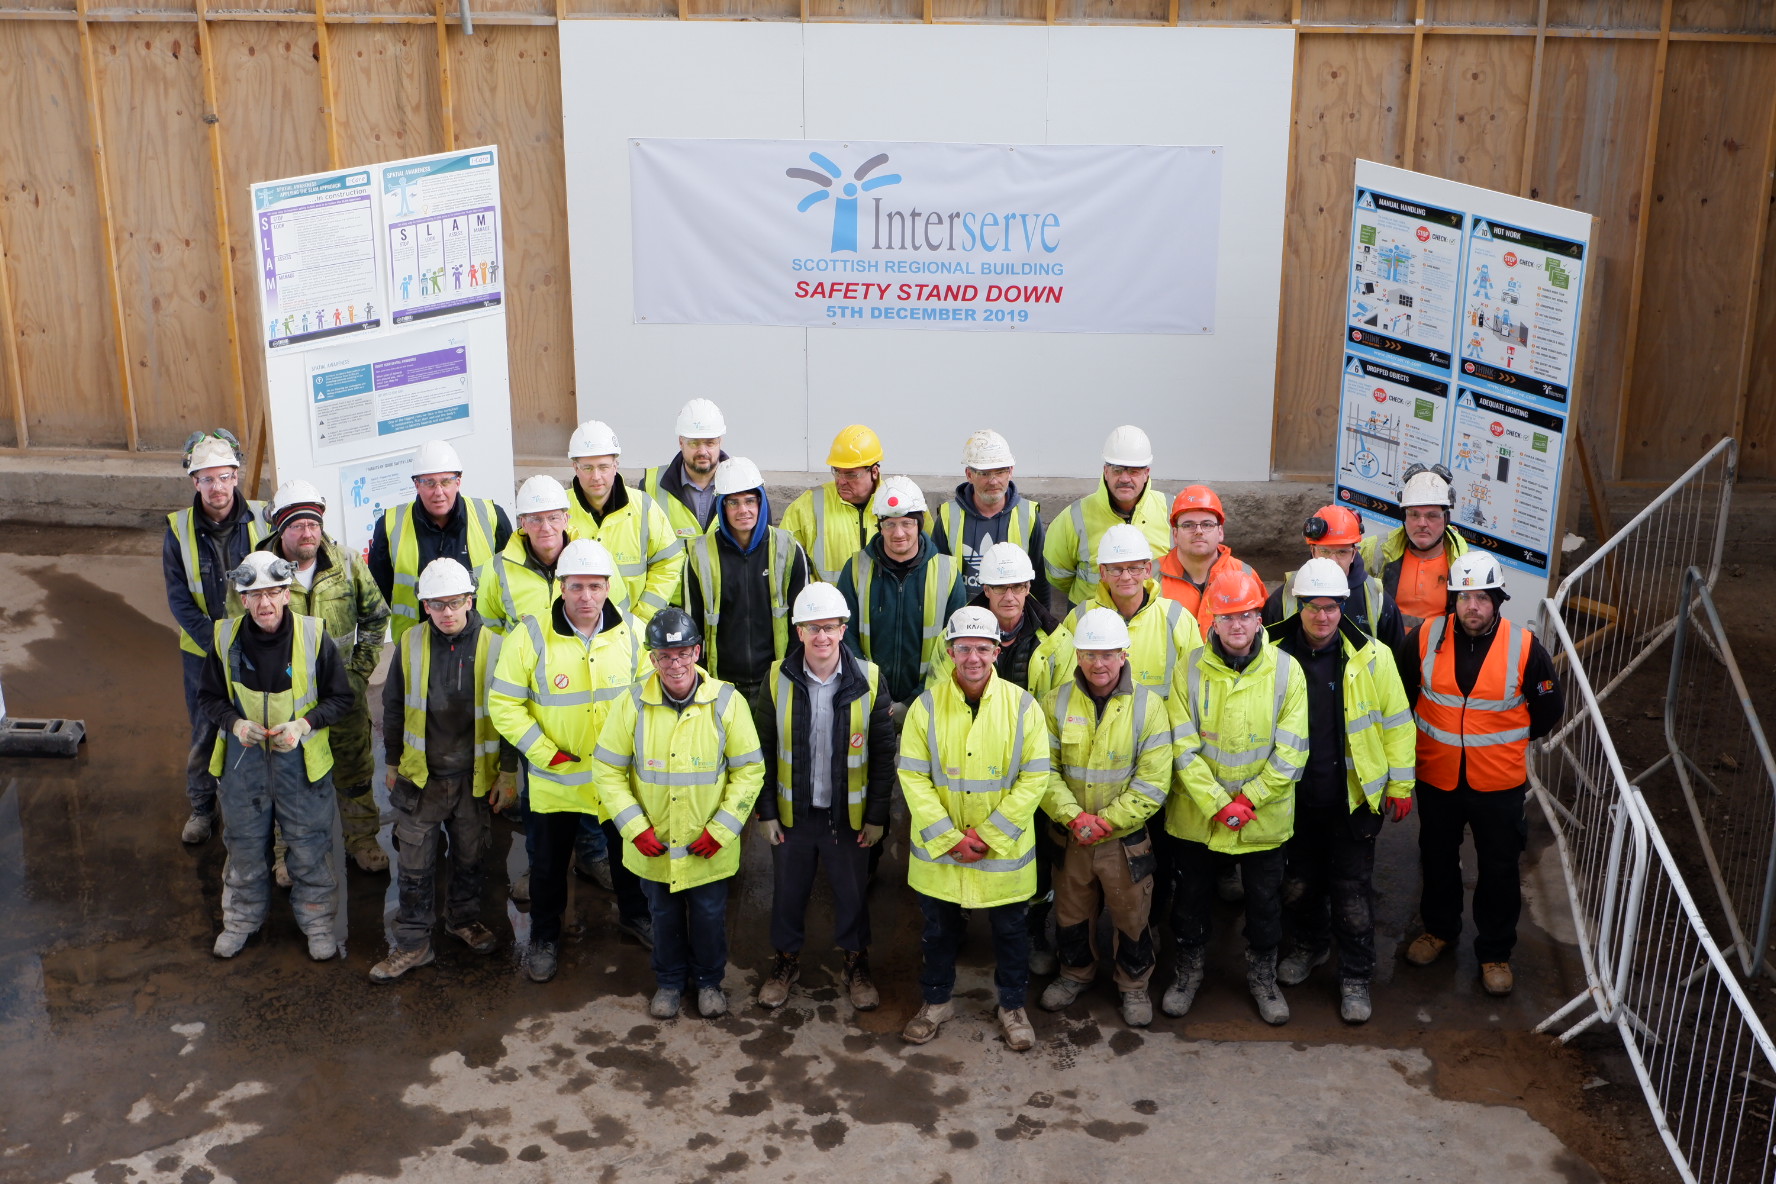 Interserve Construction hosts global safety stand down